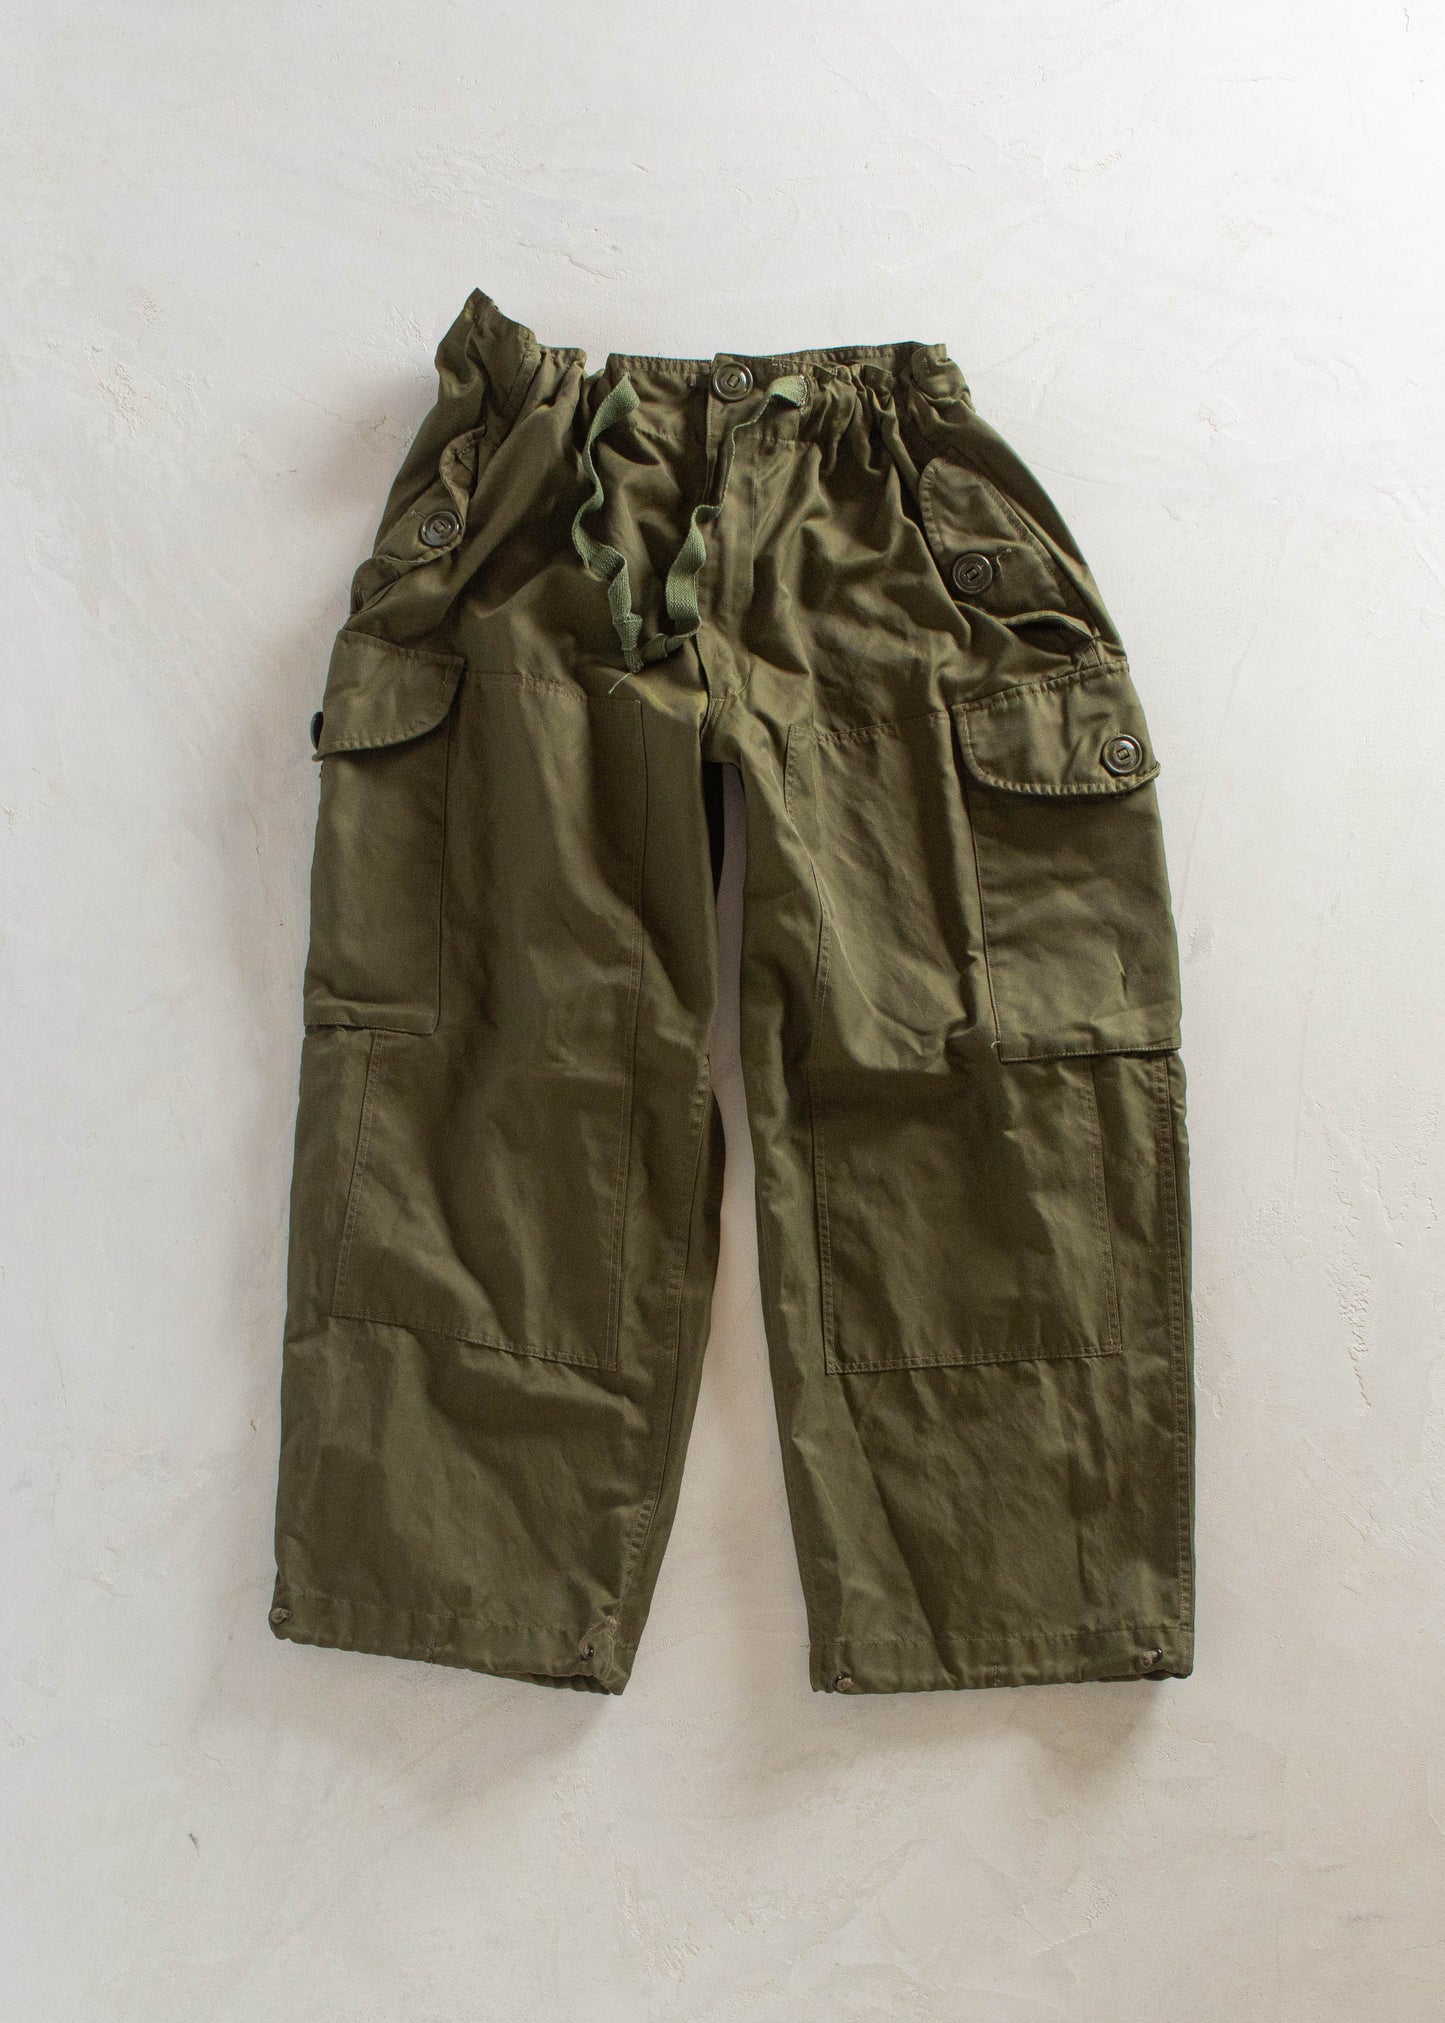 1980s Military Wind Cargo Pants Size L/XL